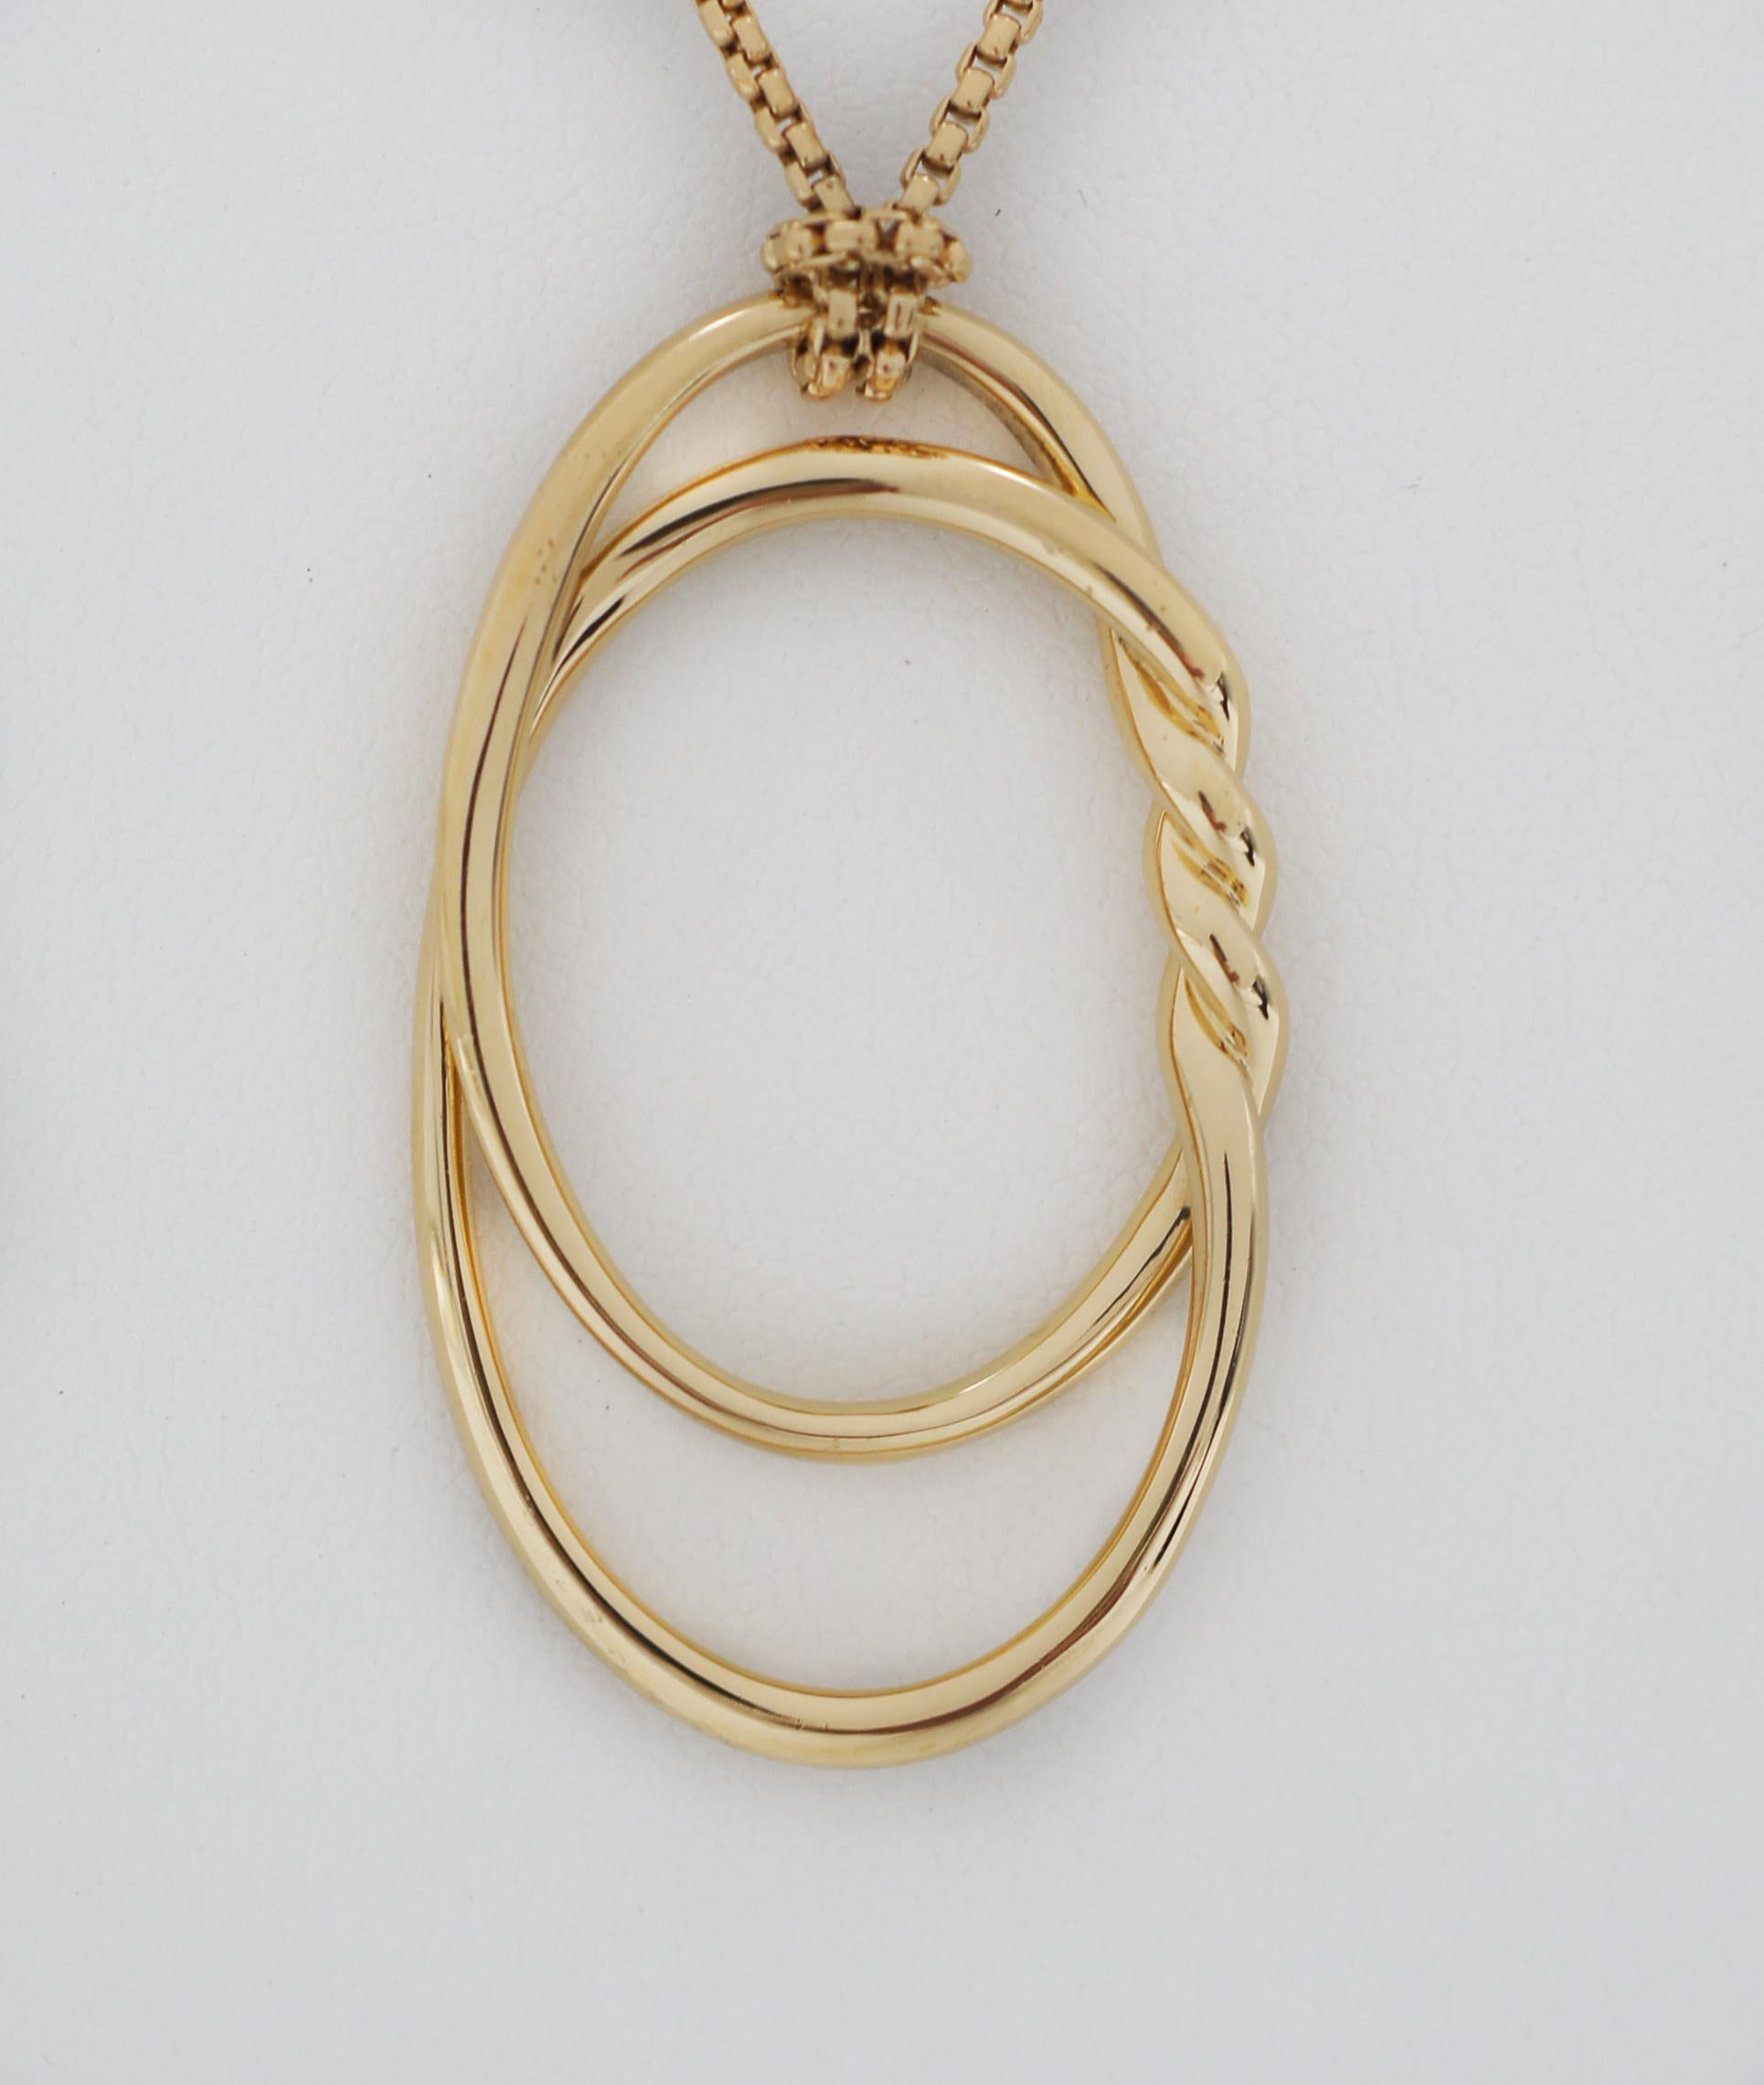 David Yurman
Continuance Pendant Necklace
DETAILS:
Metal Type: 18K Yellow Gold
Hallmarks: D.Y. 750 on pendant and Chain
Approx. Total Item Weight (g): 25.3
Approx. measurements: 1.90